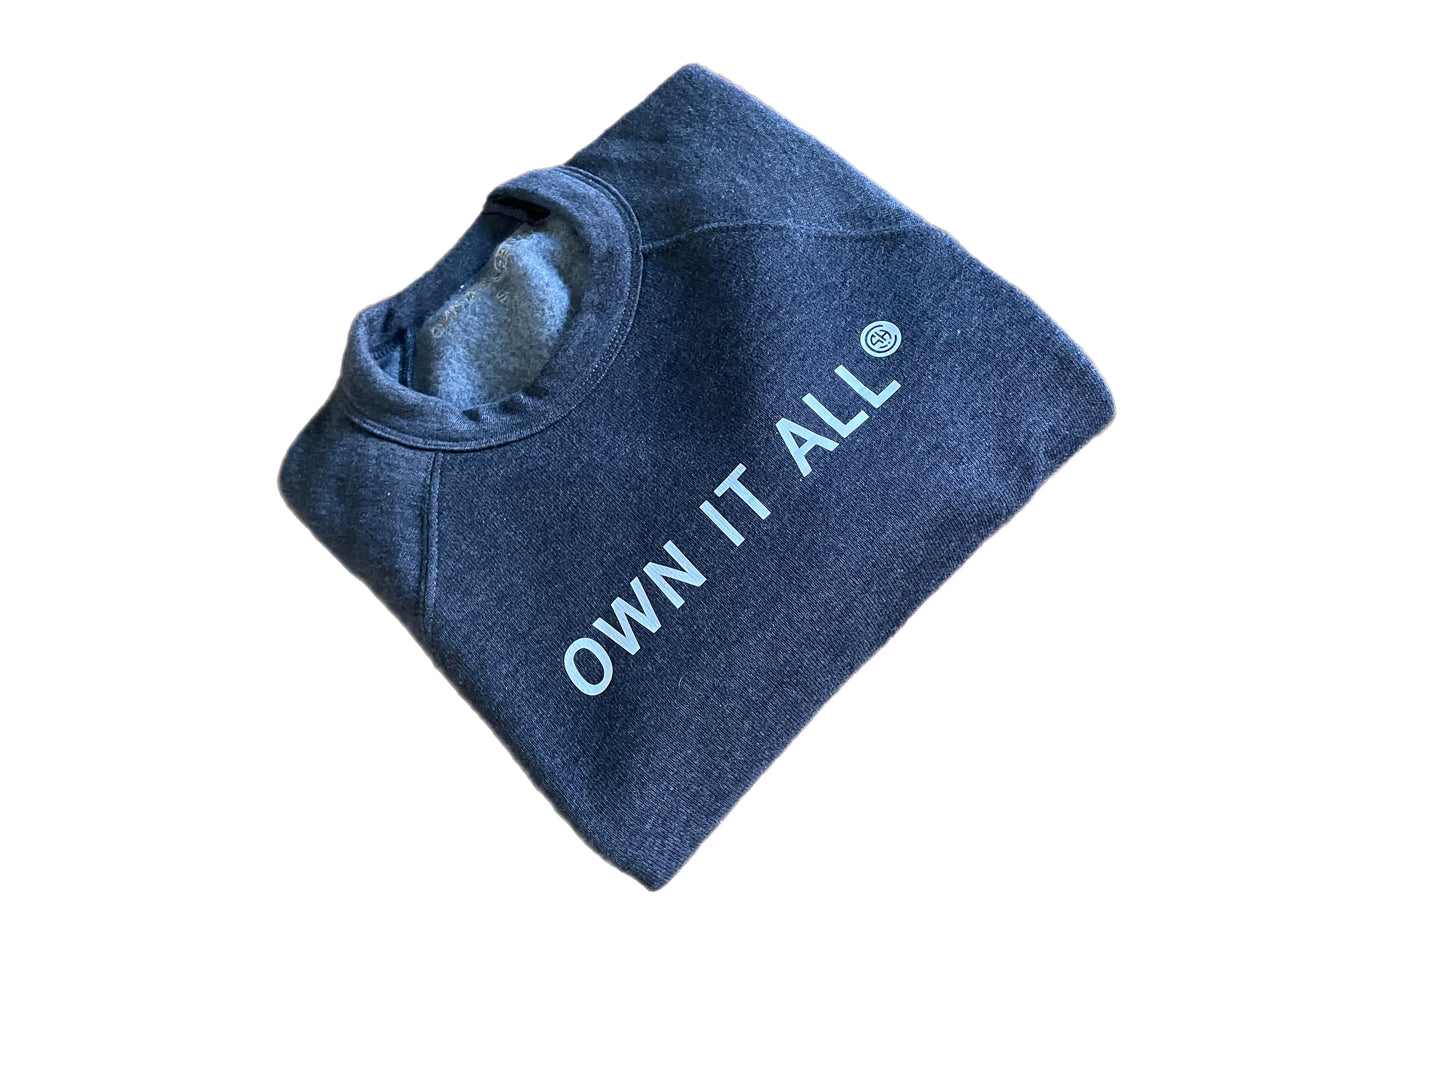 OWN IT ALL CREWNECK